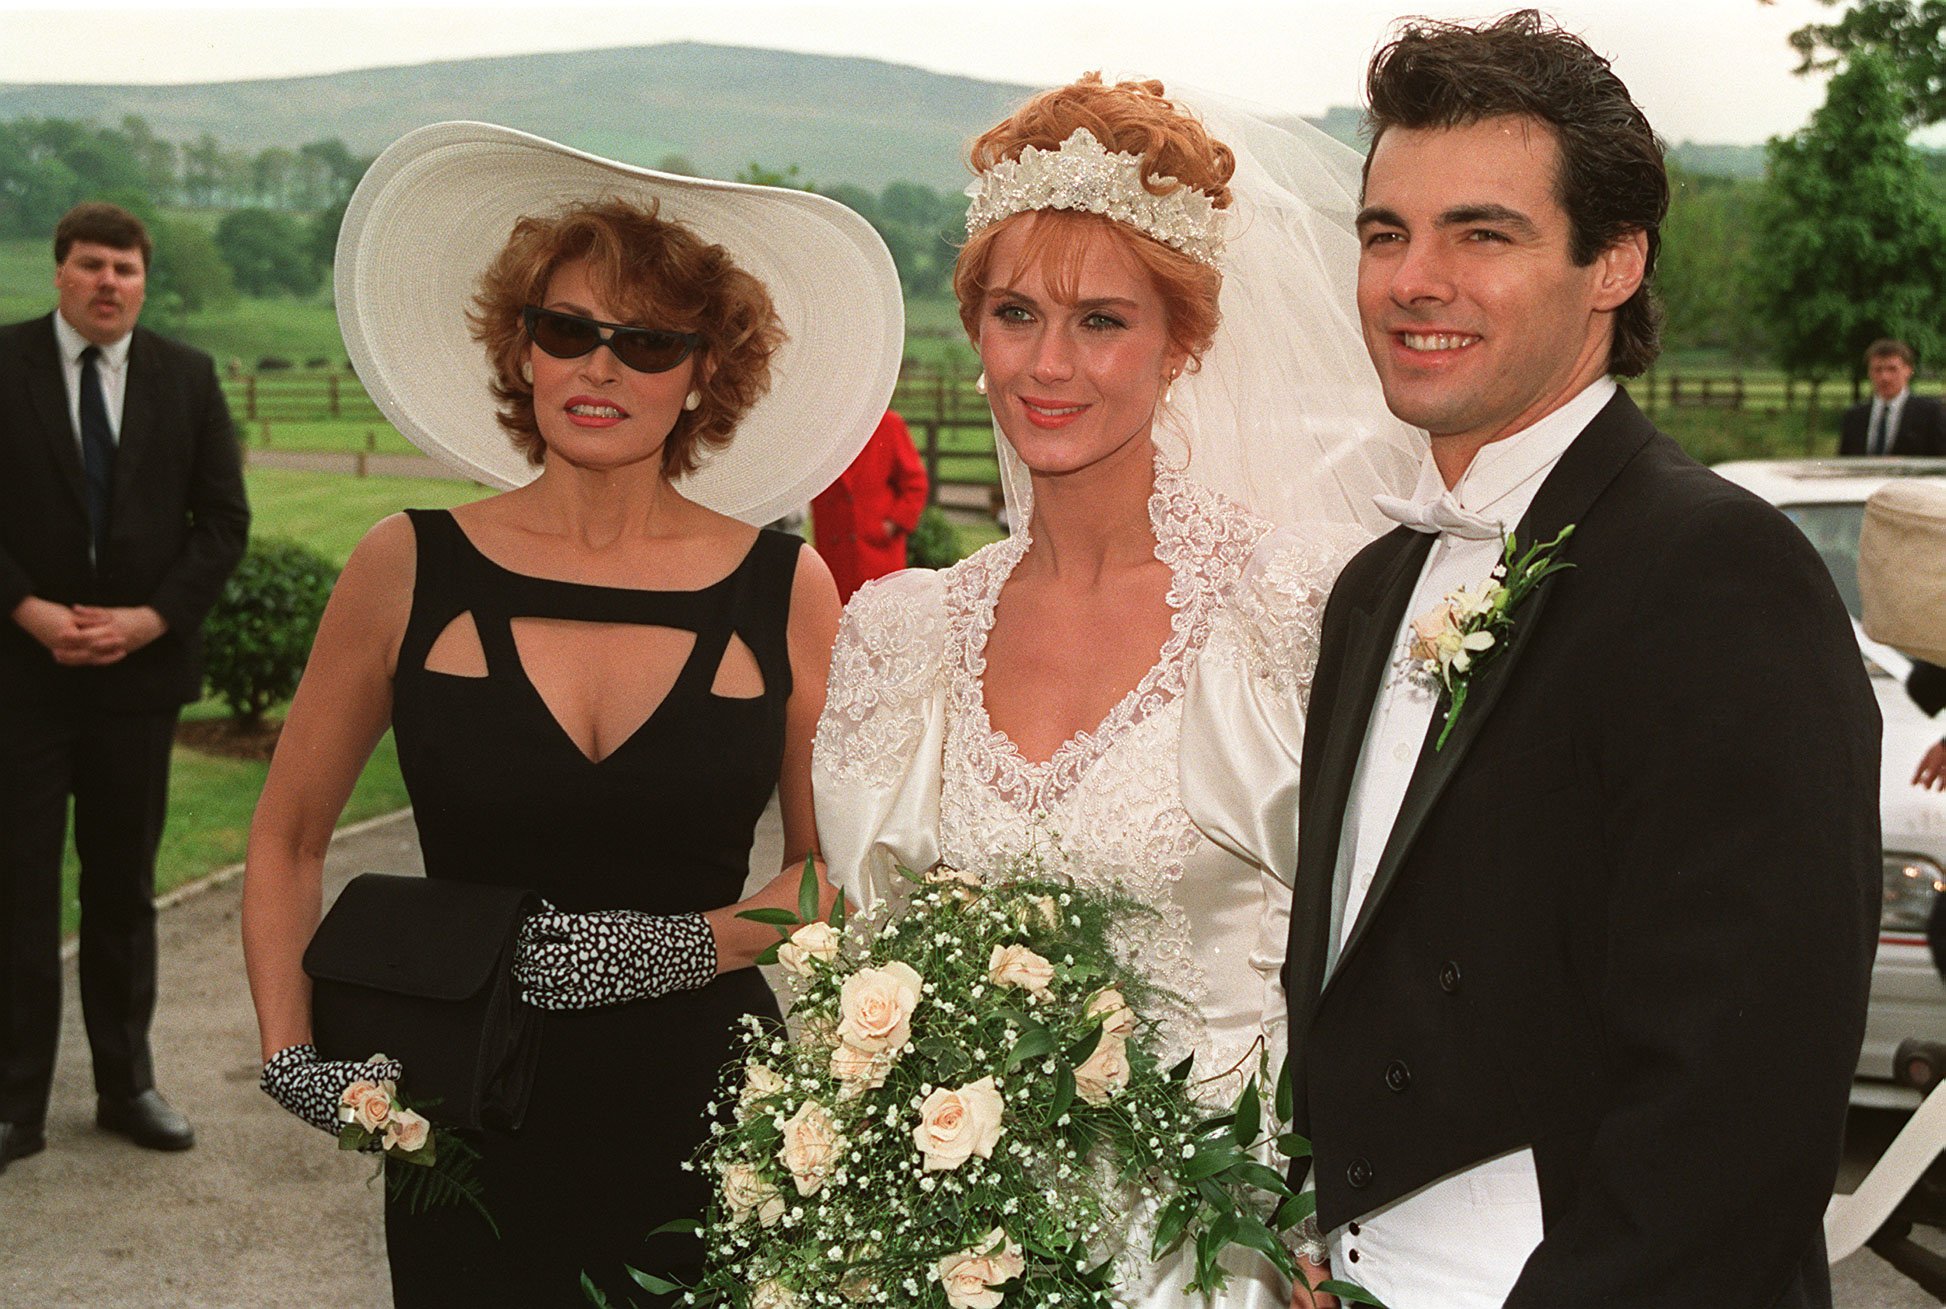 Rebecca Trueman and her husband Damon, at their wedding with his mother Raquel Welch on June 5, 1991. | Source: Getty Images